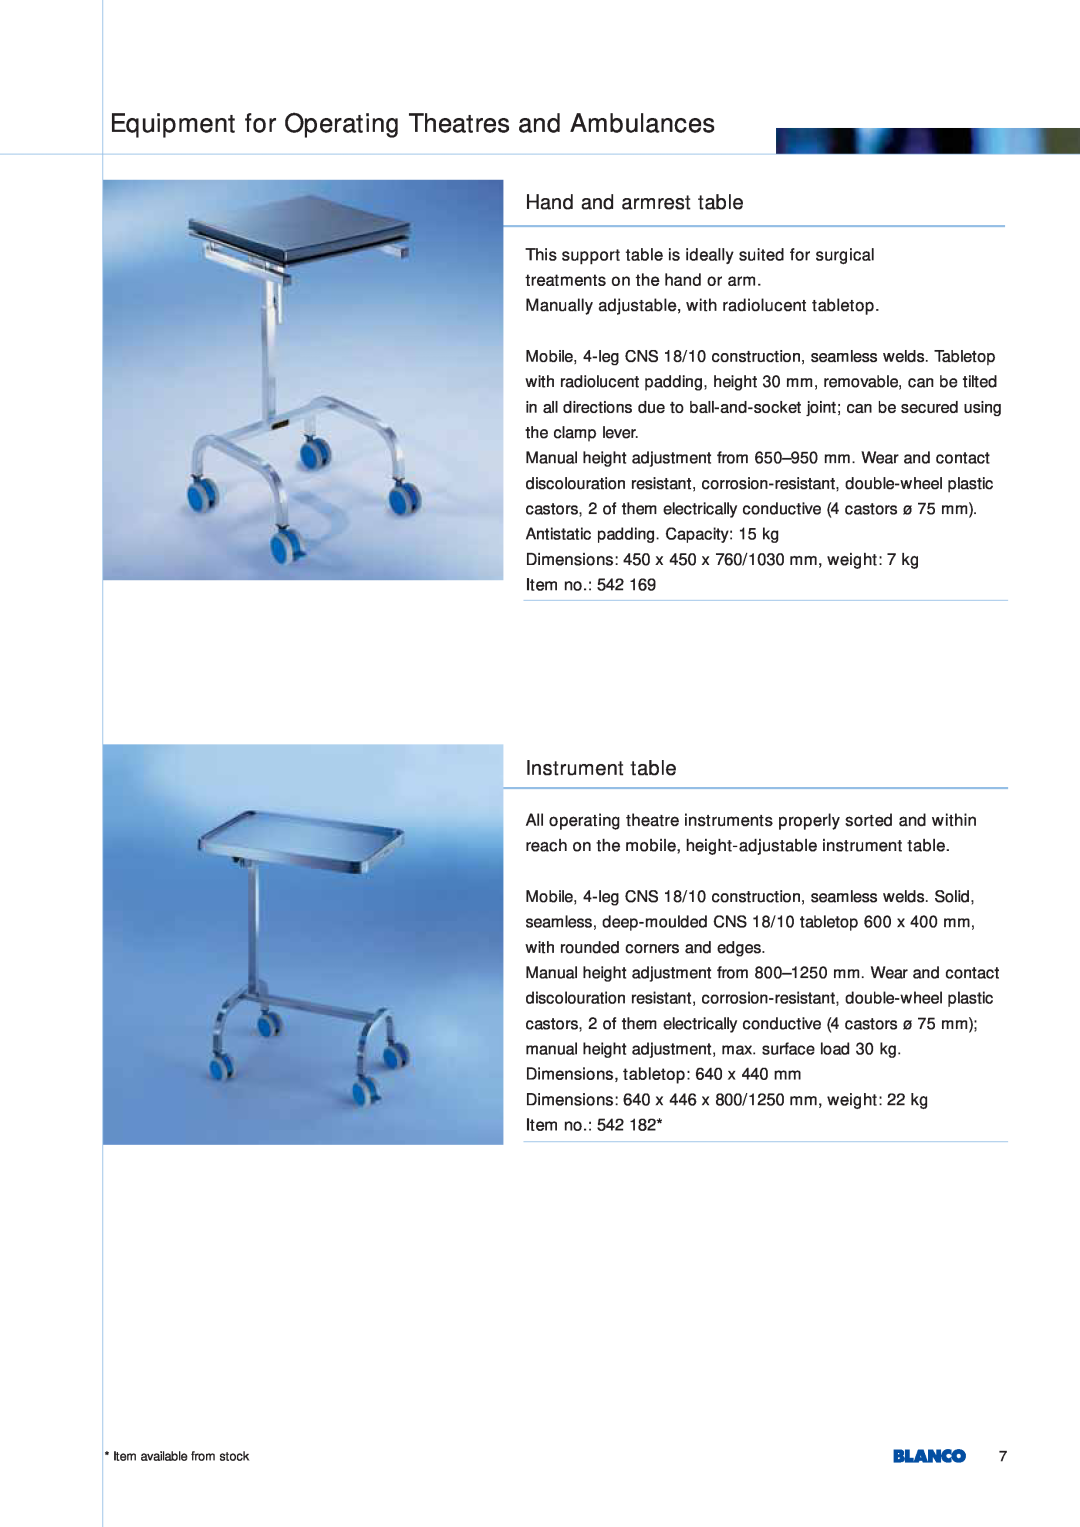 Blanco Tbingen manual Hand and armrest table, Instrument table, Equipment for Operating Theatres and Ambulances 